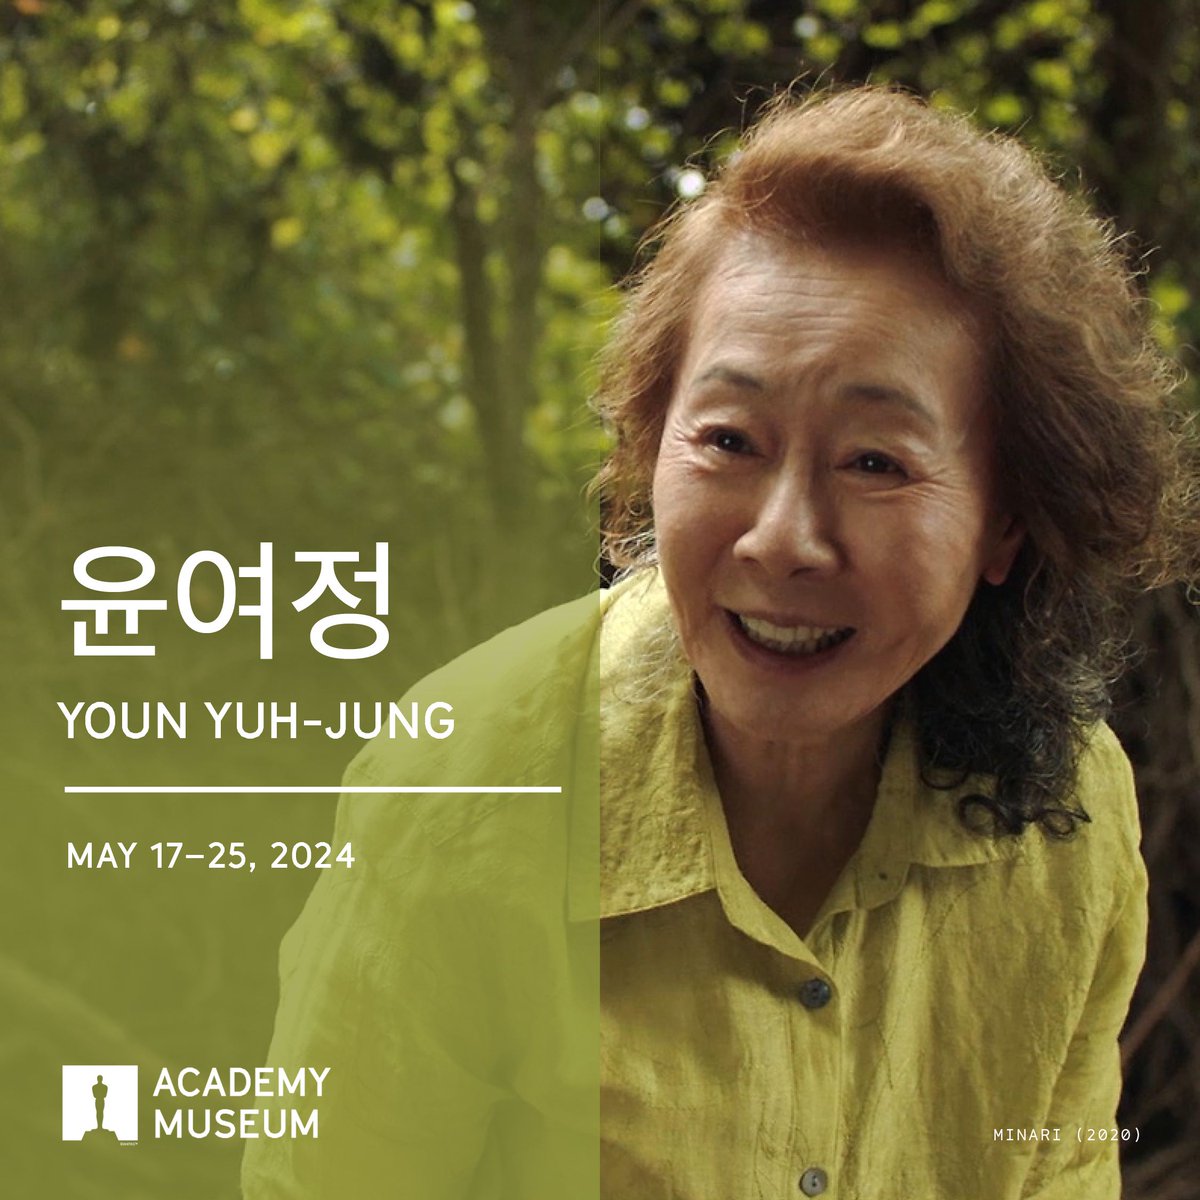 Join us for a screening of MINARI (2020) on May 17 with Youn Yuh-jung in-person and WOMAN OF FIRE (화녀) (1971) on May 18 followed by a post-screening conversation with Youn, moderated by writer-director Lee Sung-jin. Reserve tickets at: acadmu.se/4a6CPuR